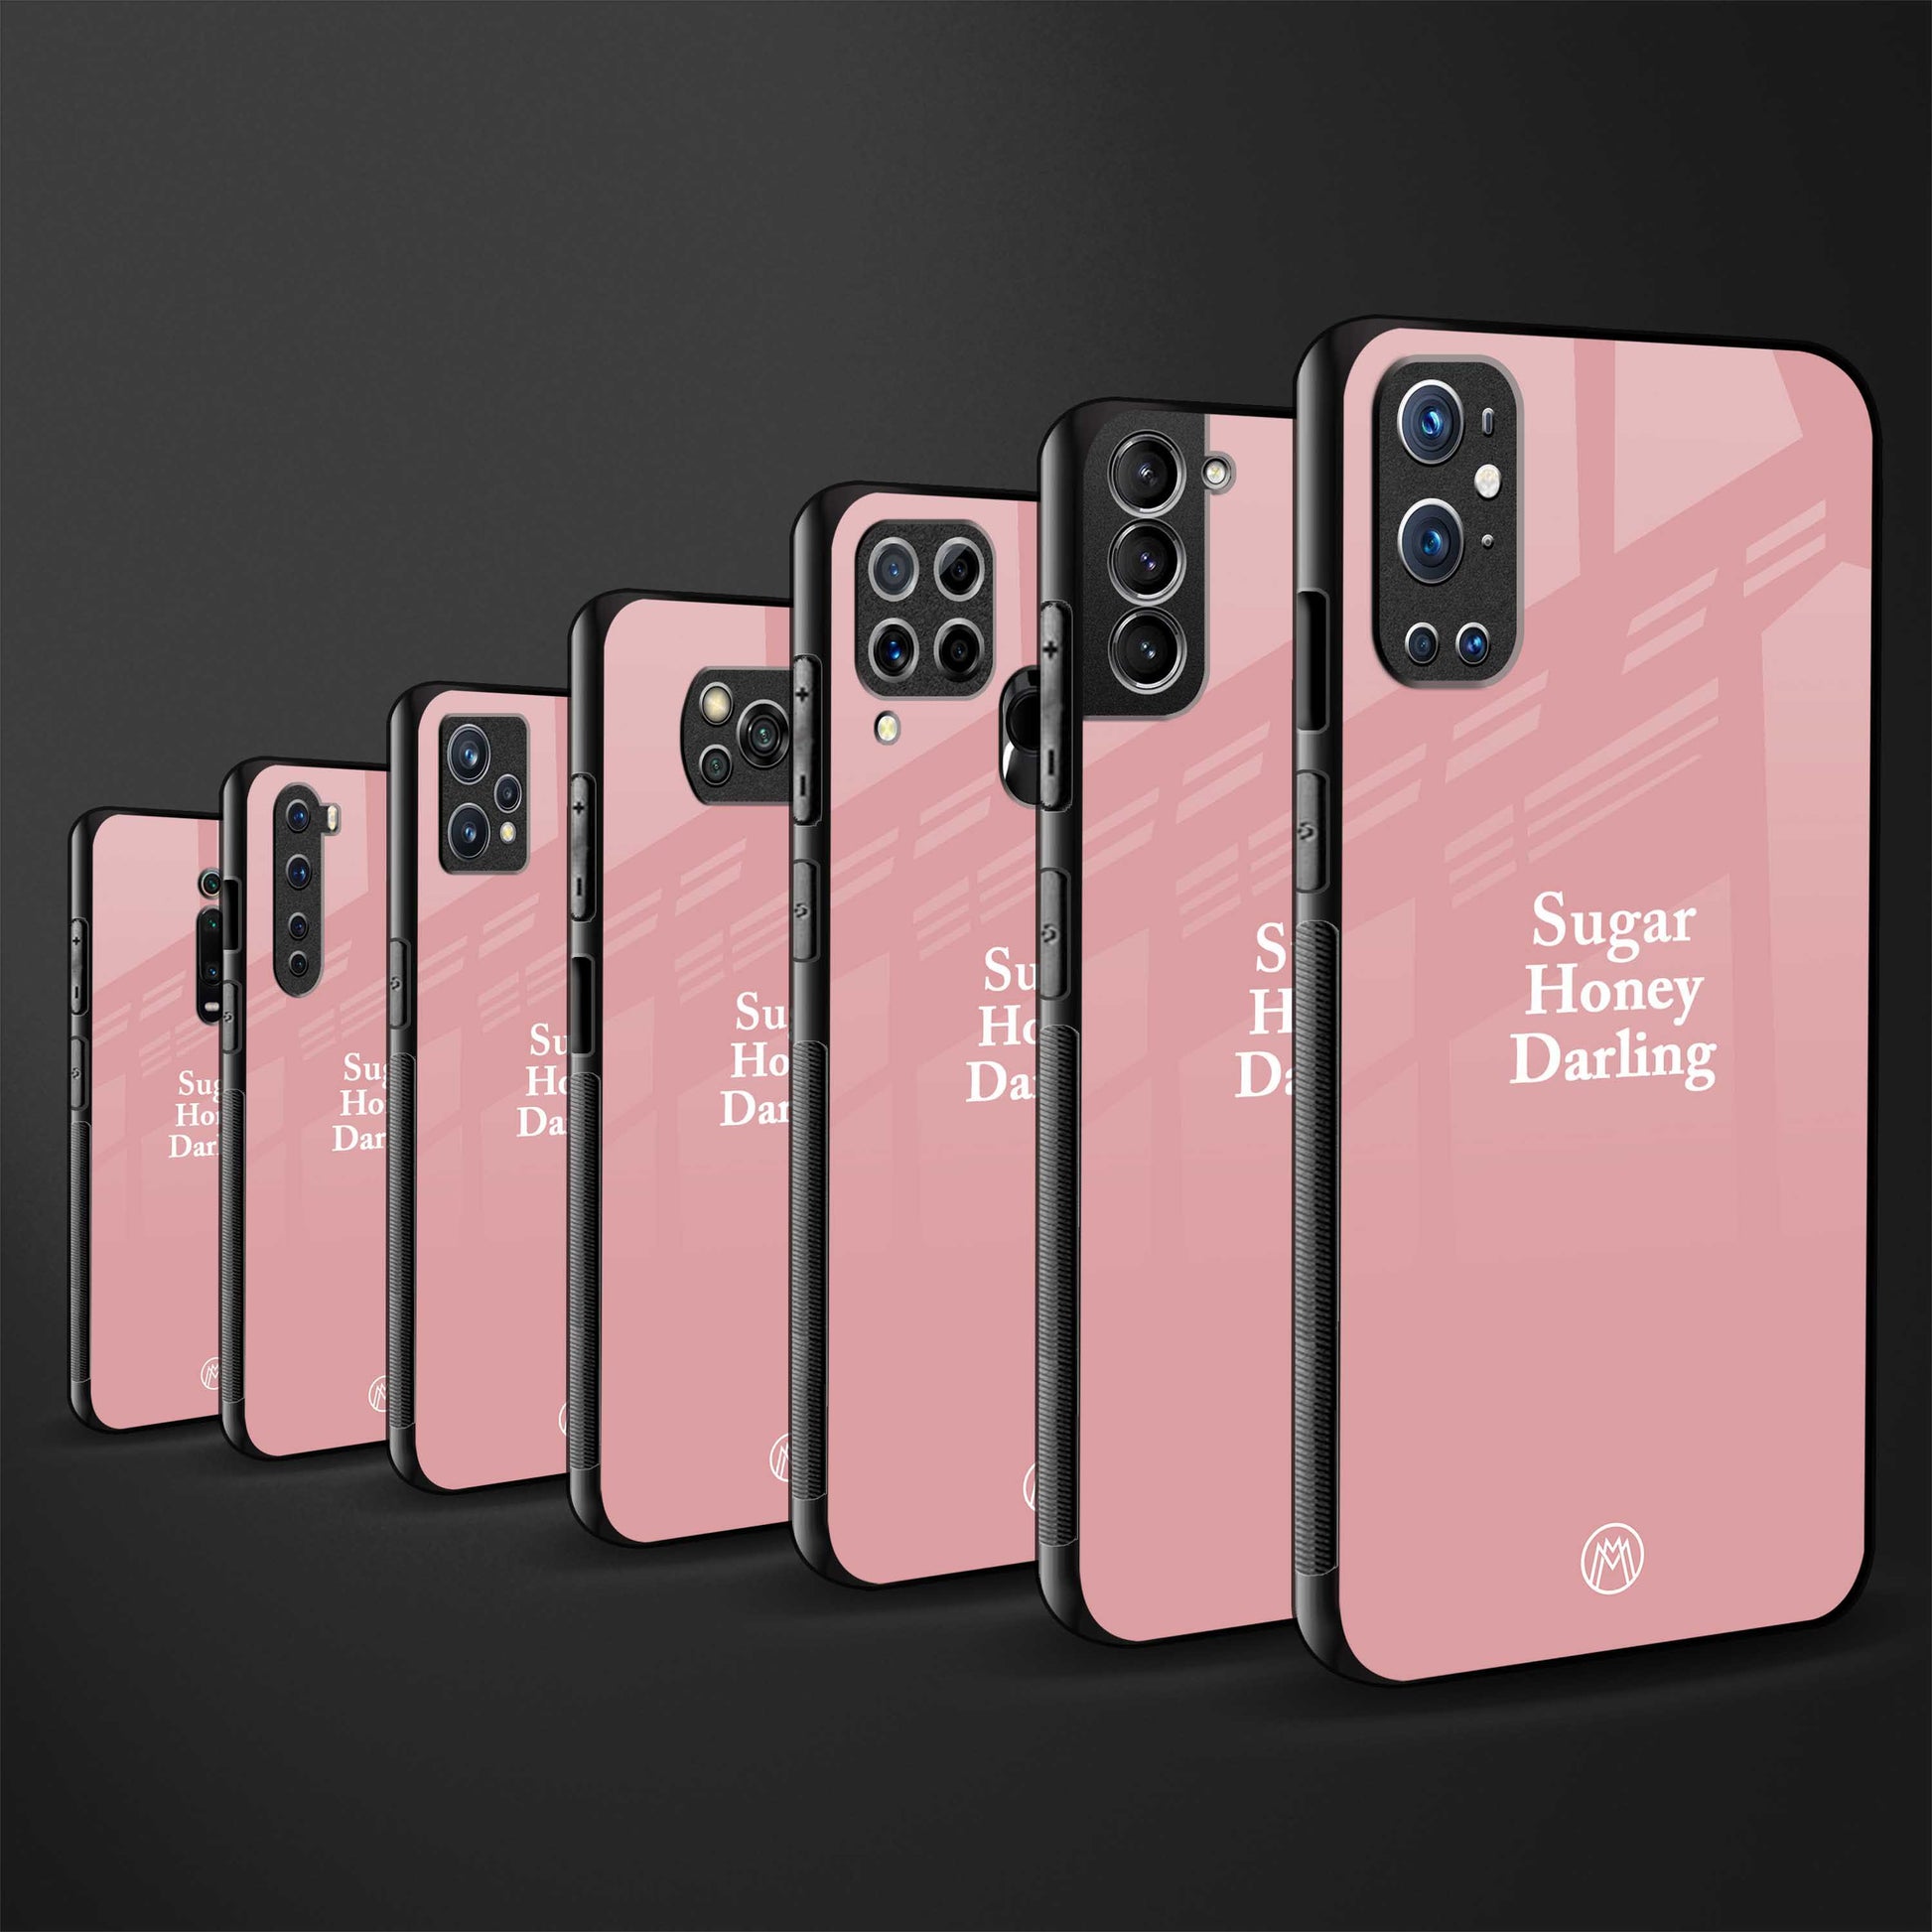 suger honey darling glass case for oneplus 7 pro image-3